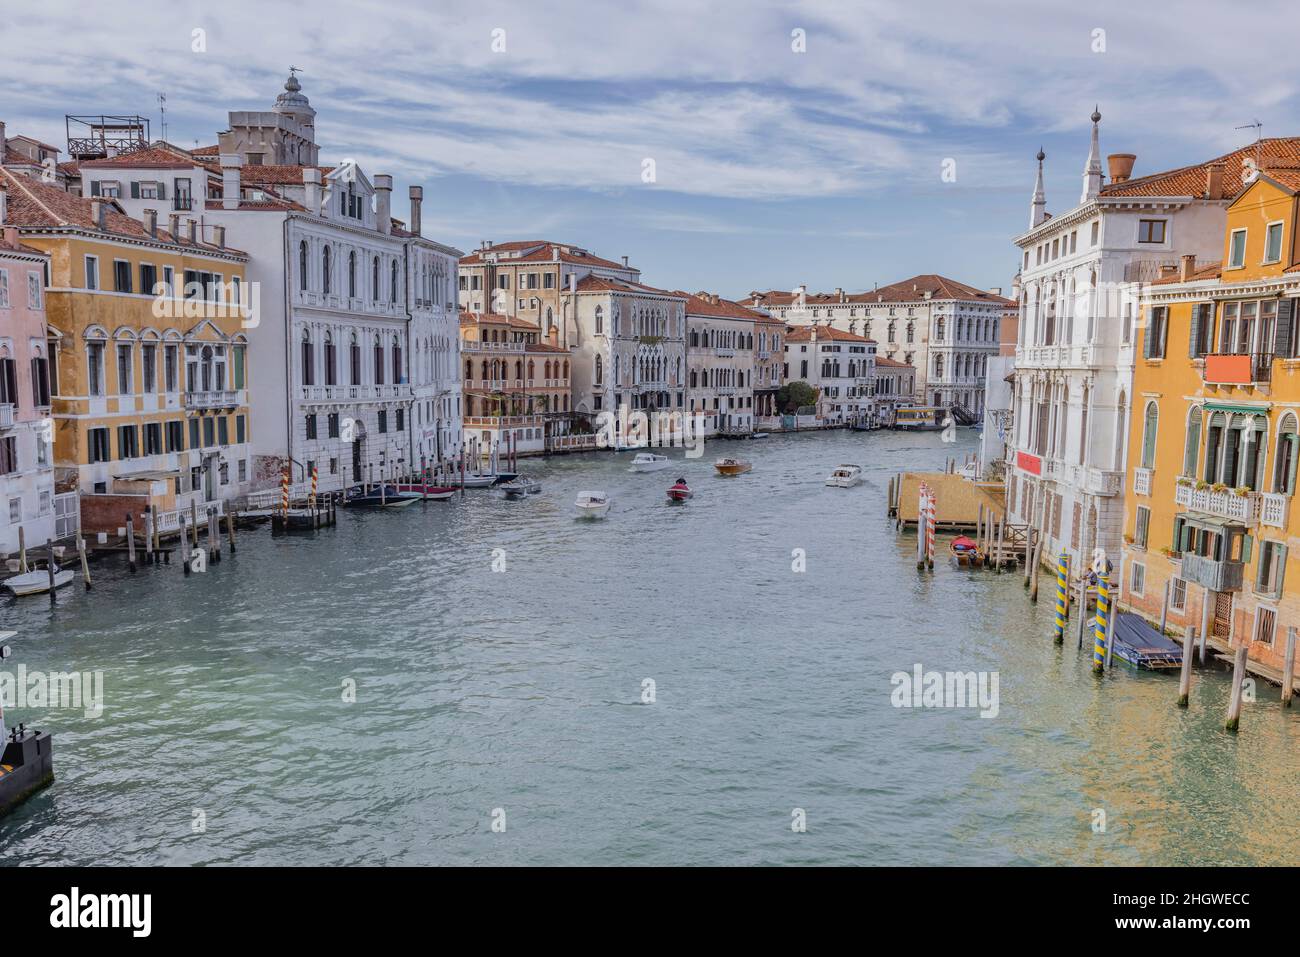 Europe, Italy, Venice, View down the Grand Canal from Ponte dell'Accademia Stock Photo